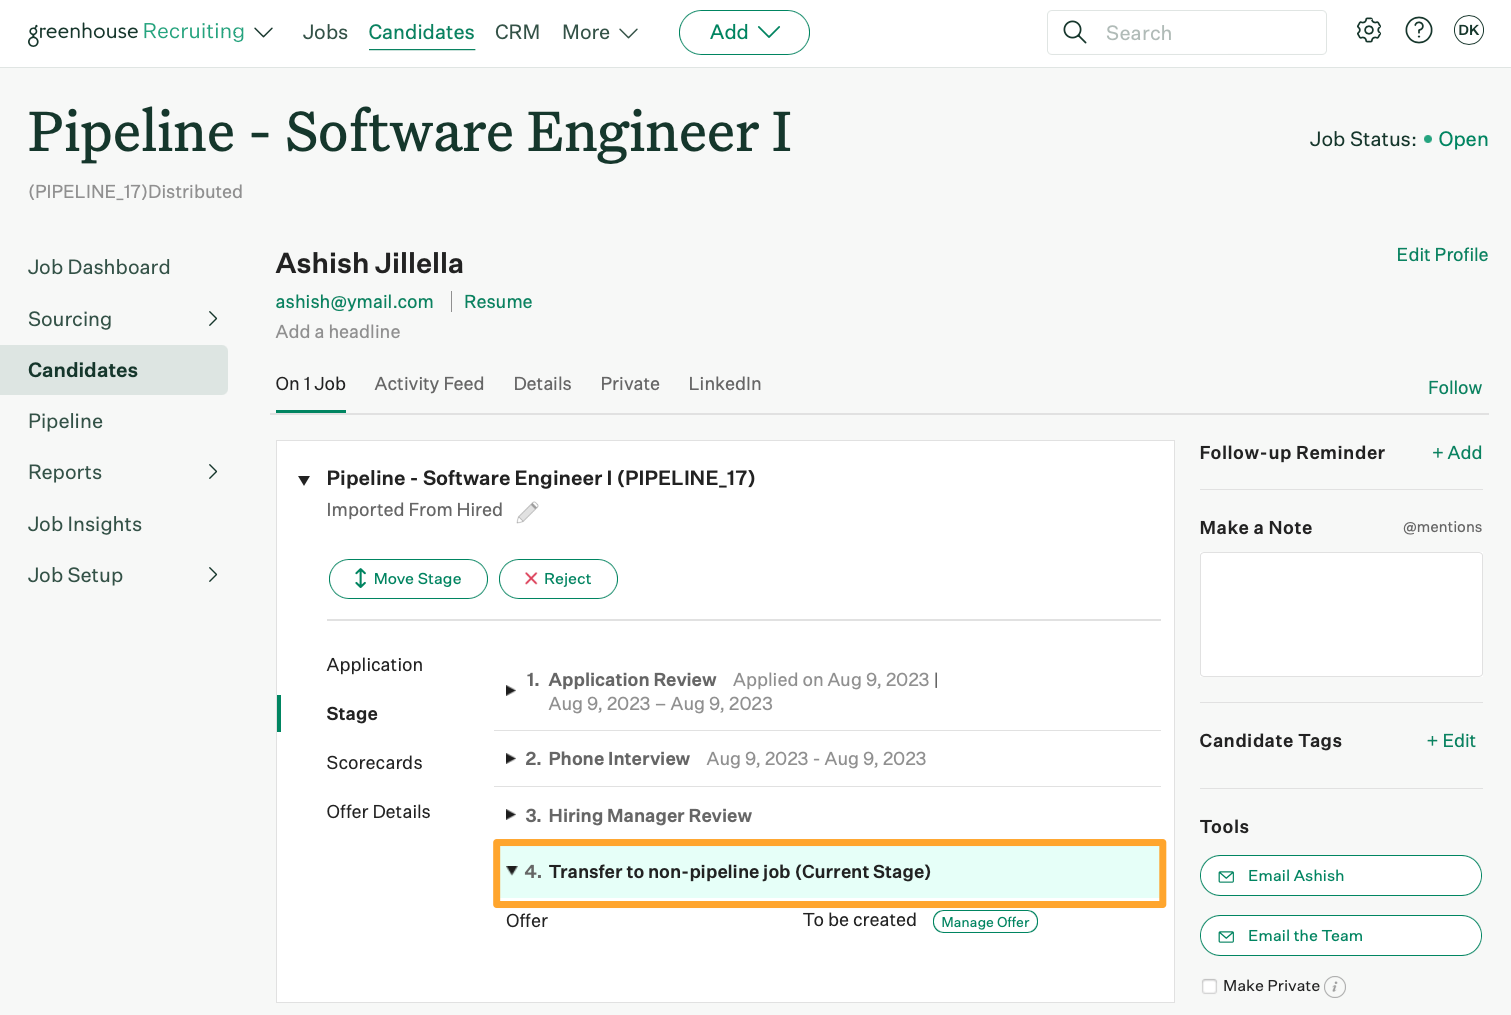 An example candidate named Ashish is in a custom offer stage called Transfer to non-pipeline job